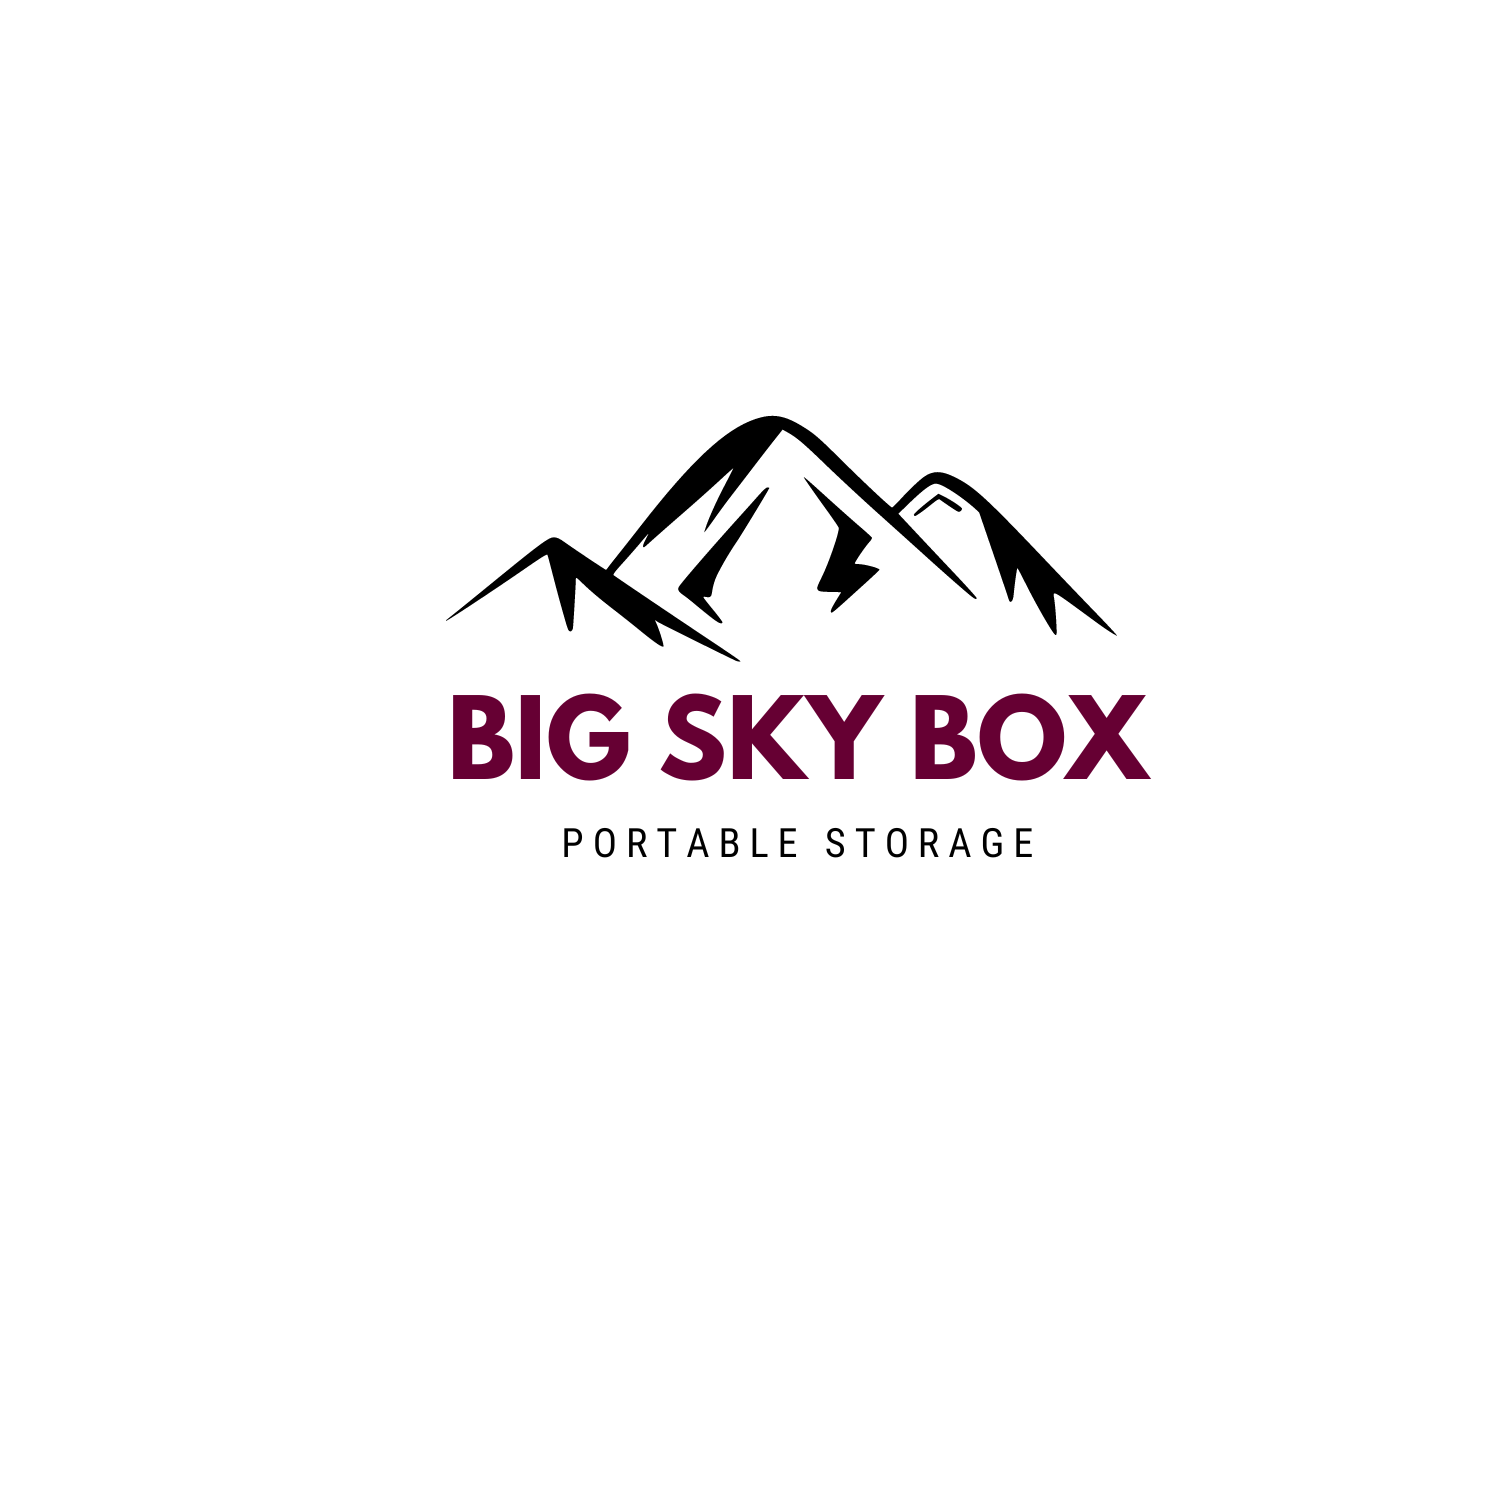 Big Sky Box  Moving and Portable Storage in Missoula